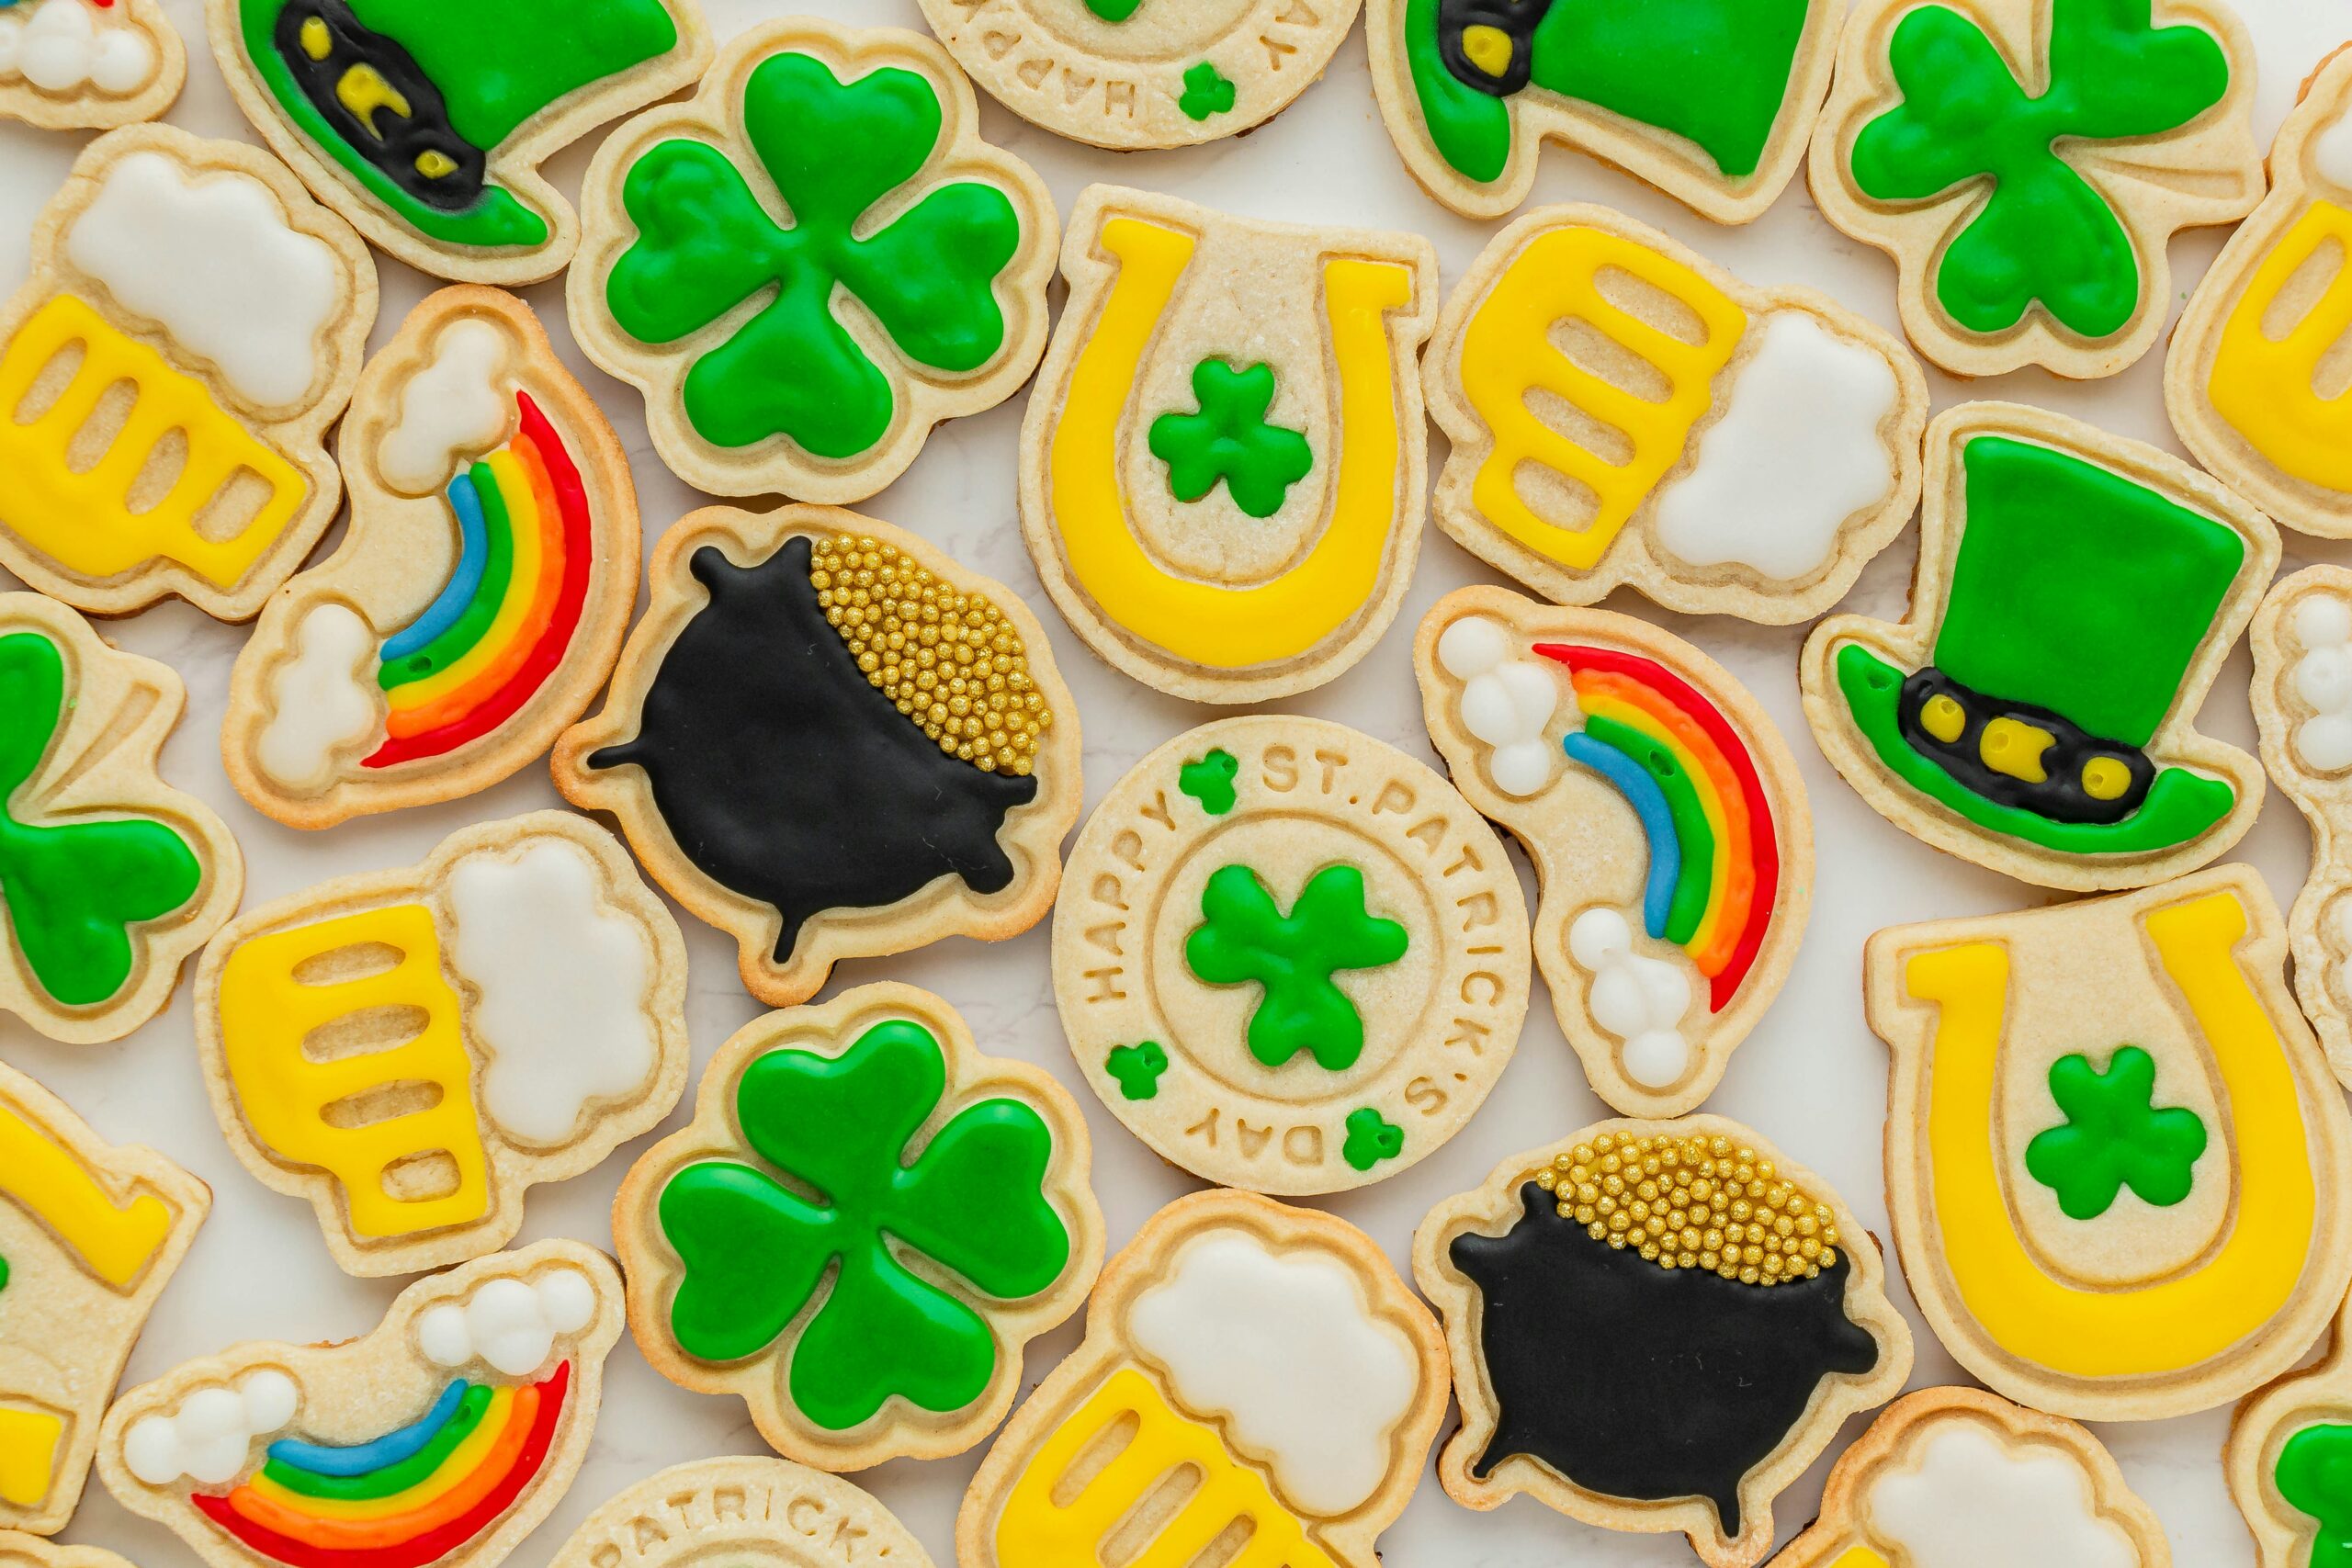 ices cut out cookies in the shape of rainbows, shamrocks, and pints for St. Patrick's day